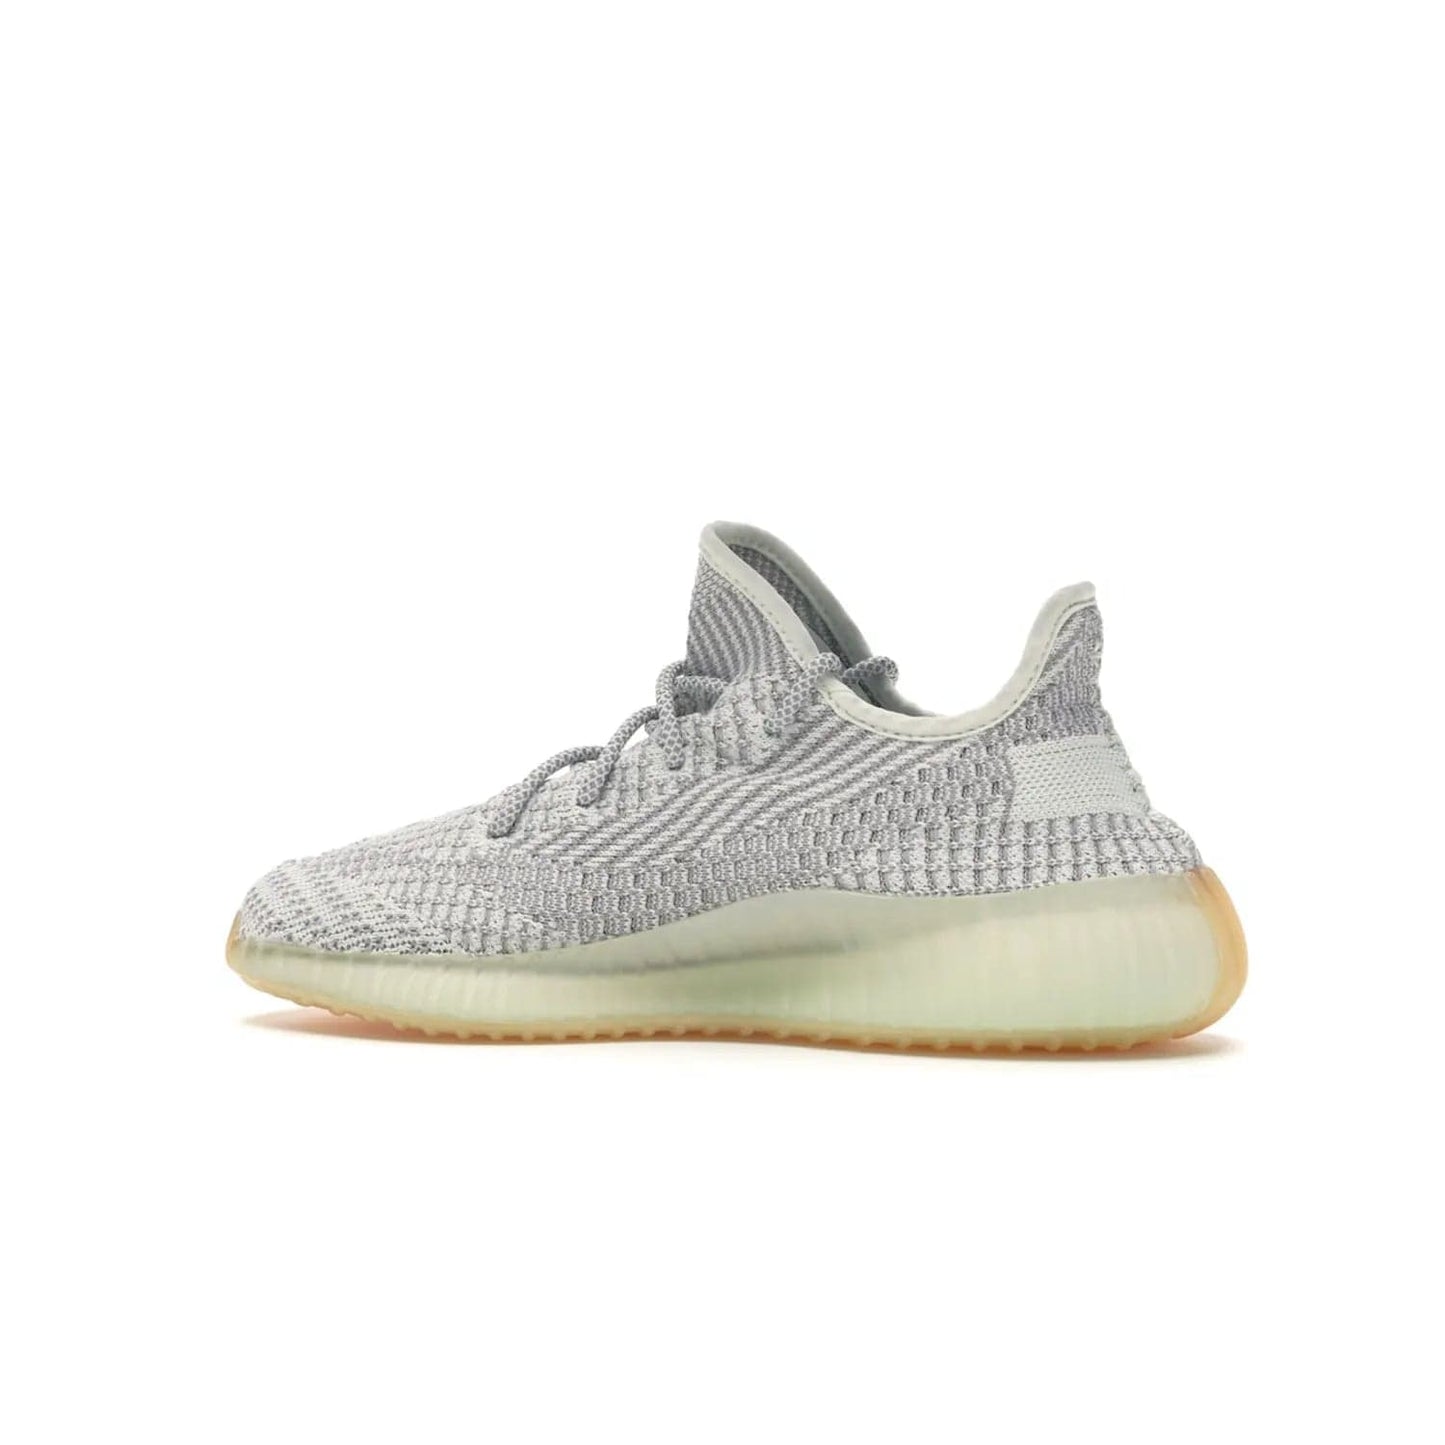 adidas Yeezy Boost 350 V2 Yeshaya (Non-Reflective) - Image 21 - Only at www.BallersClubKickz.com - Step out in style with the adidas Yeezy Boost 350 V2 Yeshaya (Non-Reflective). Gray-and-white Primeknit upper with mesh side stripe & rope laces, plus a translucent Boost sole with a hint of yellow. Make a statement and feel comfortable with this stylish sneaker.